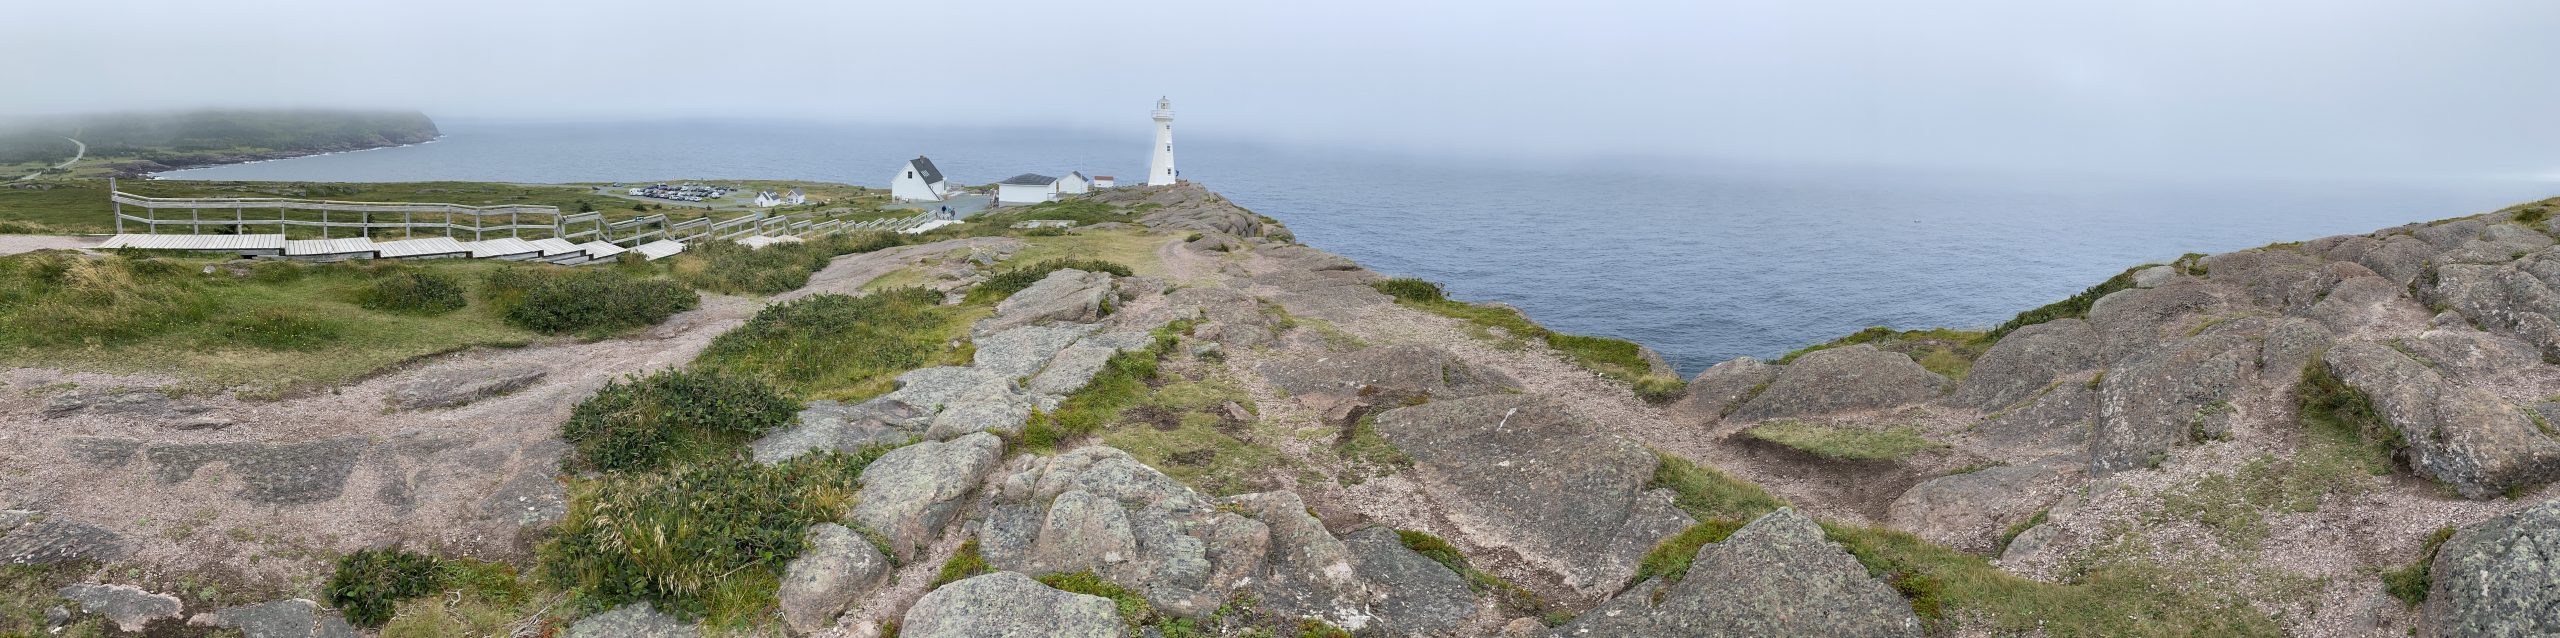 A panoramic view of the Cape Spear coast from the site of the old lighthouse.